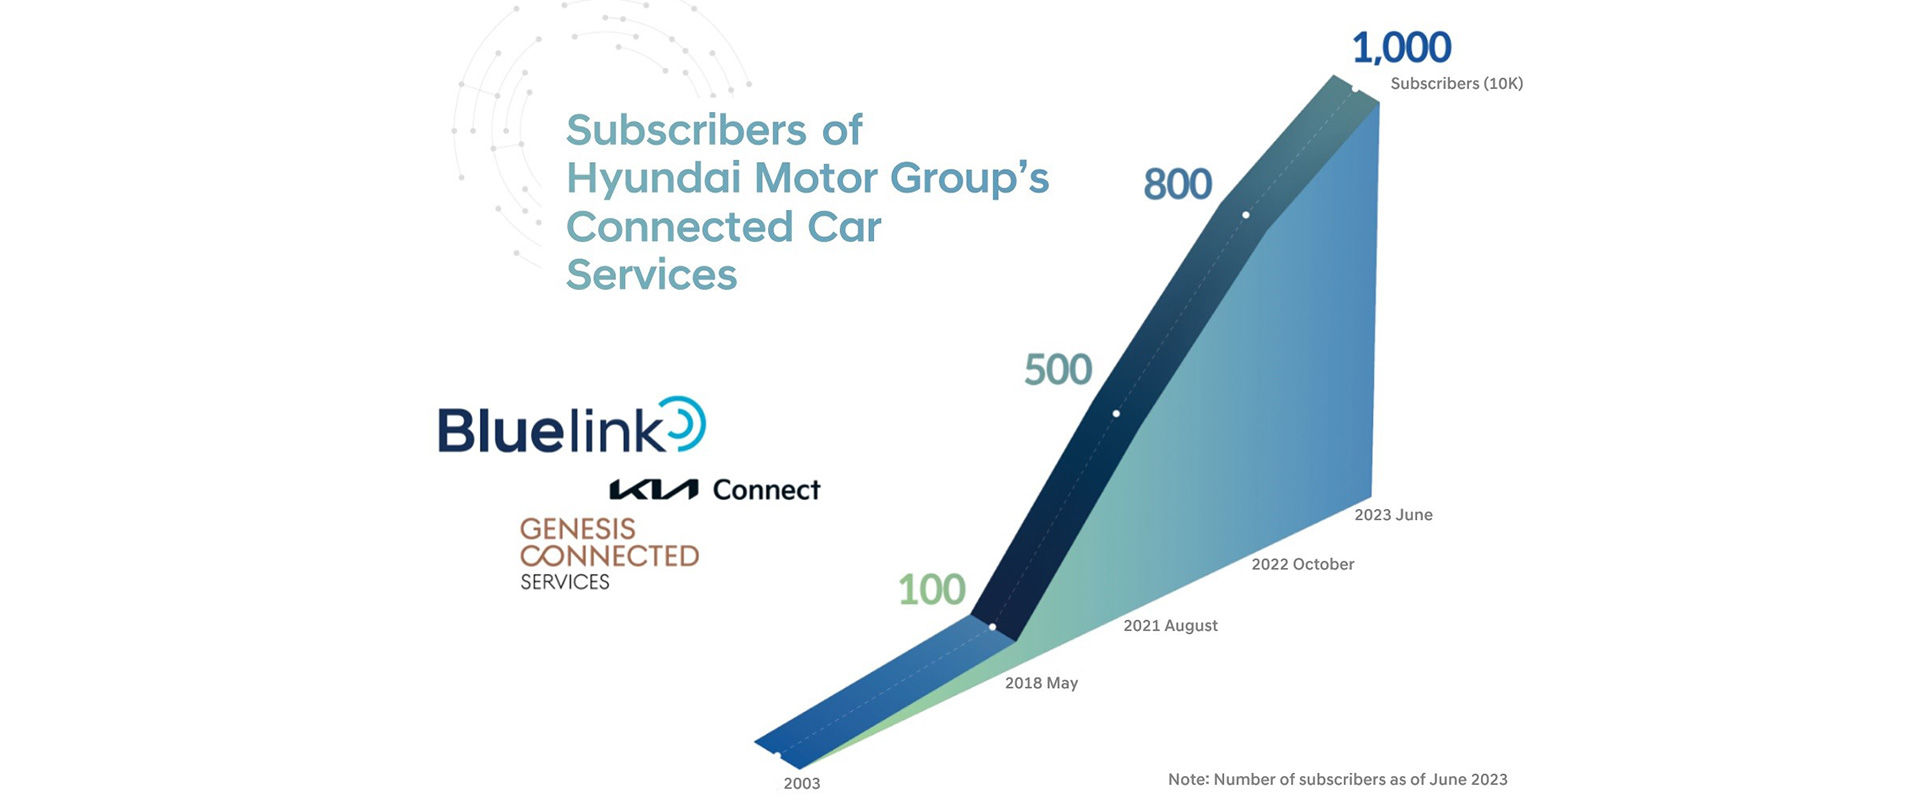 Hyundai Motor Group the Group surpassed 10 million global connected car service subscribers this month